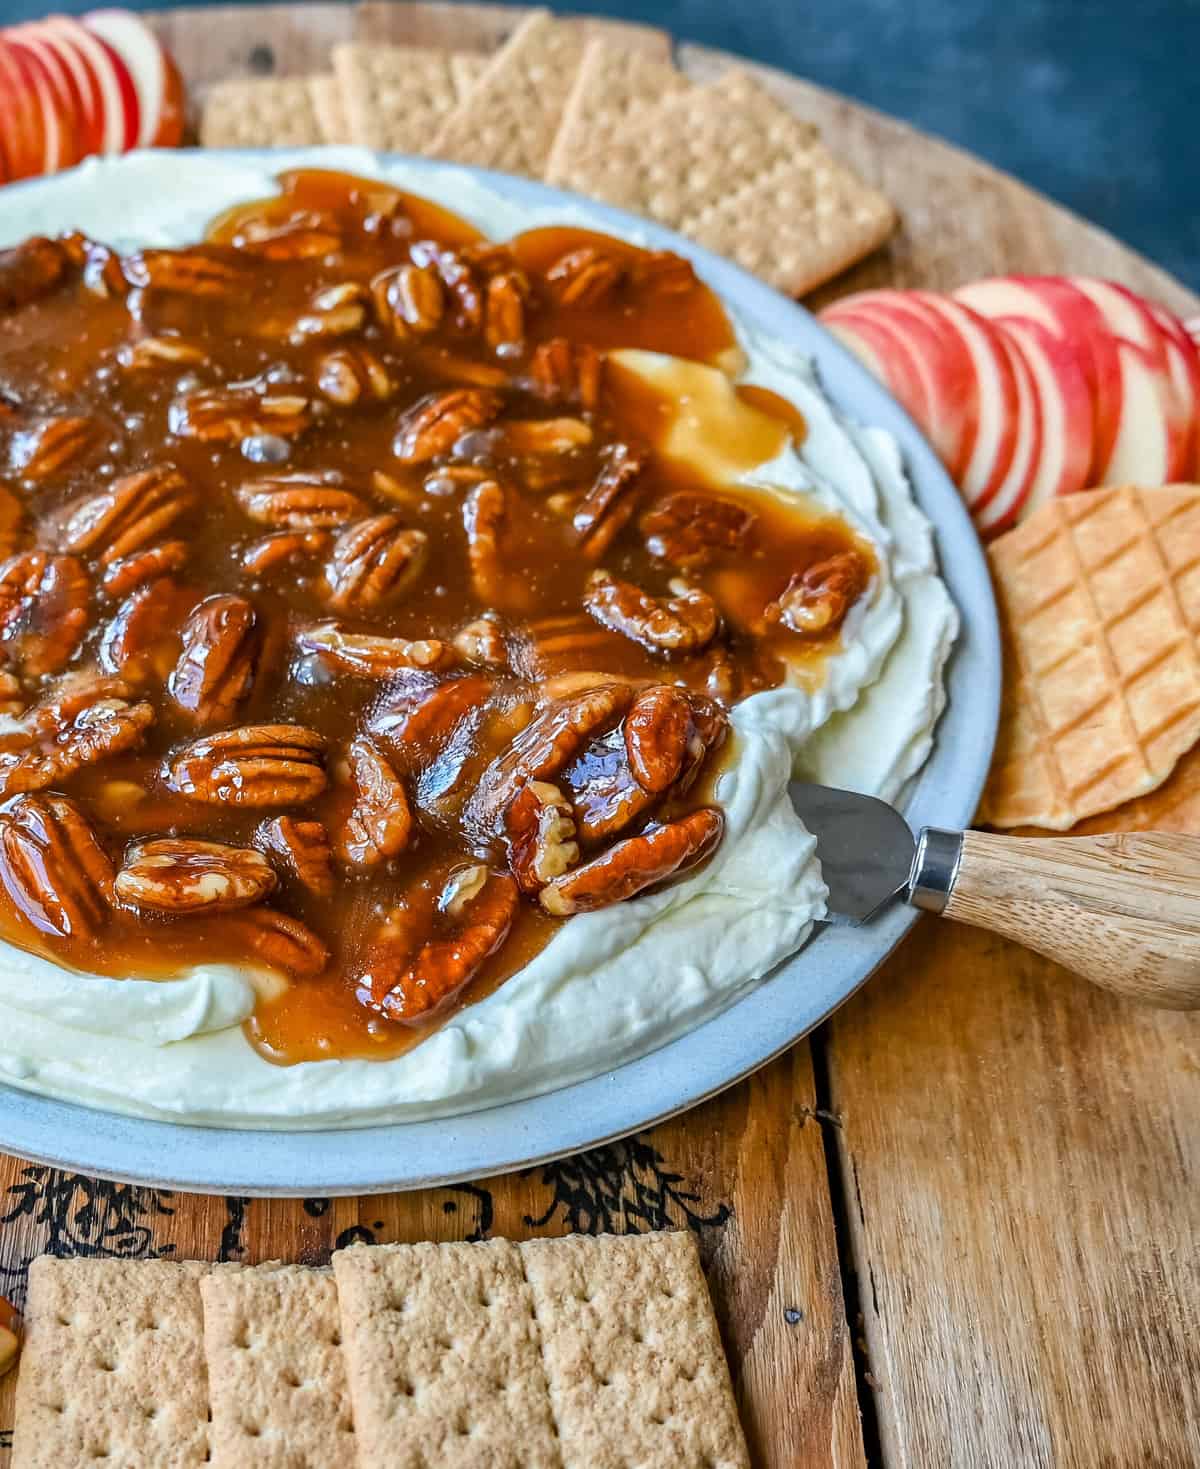 No Bake Pecan Pie Dip. This Pecan Pie Dip is made with creamy, fluffy, sweet cream cheese and whipped cream topped with a homemade pecan caramel sauce. This is all of the flavors of pecan pie without all of the work. A sweet and delicious holiday appetizer.